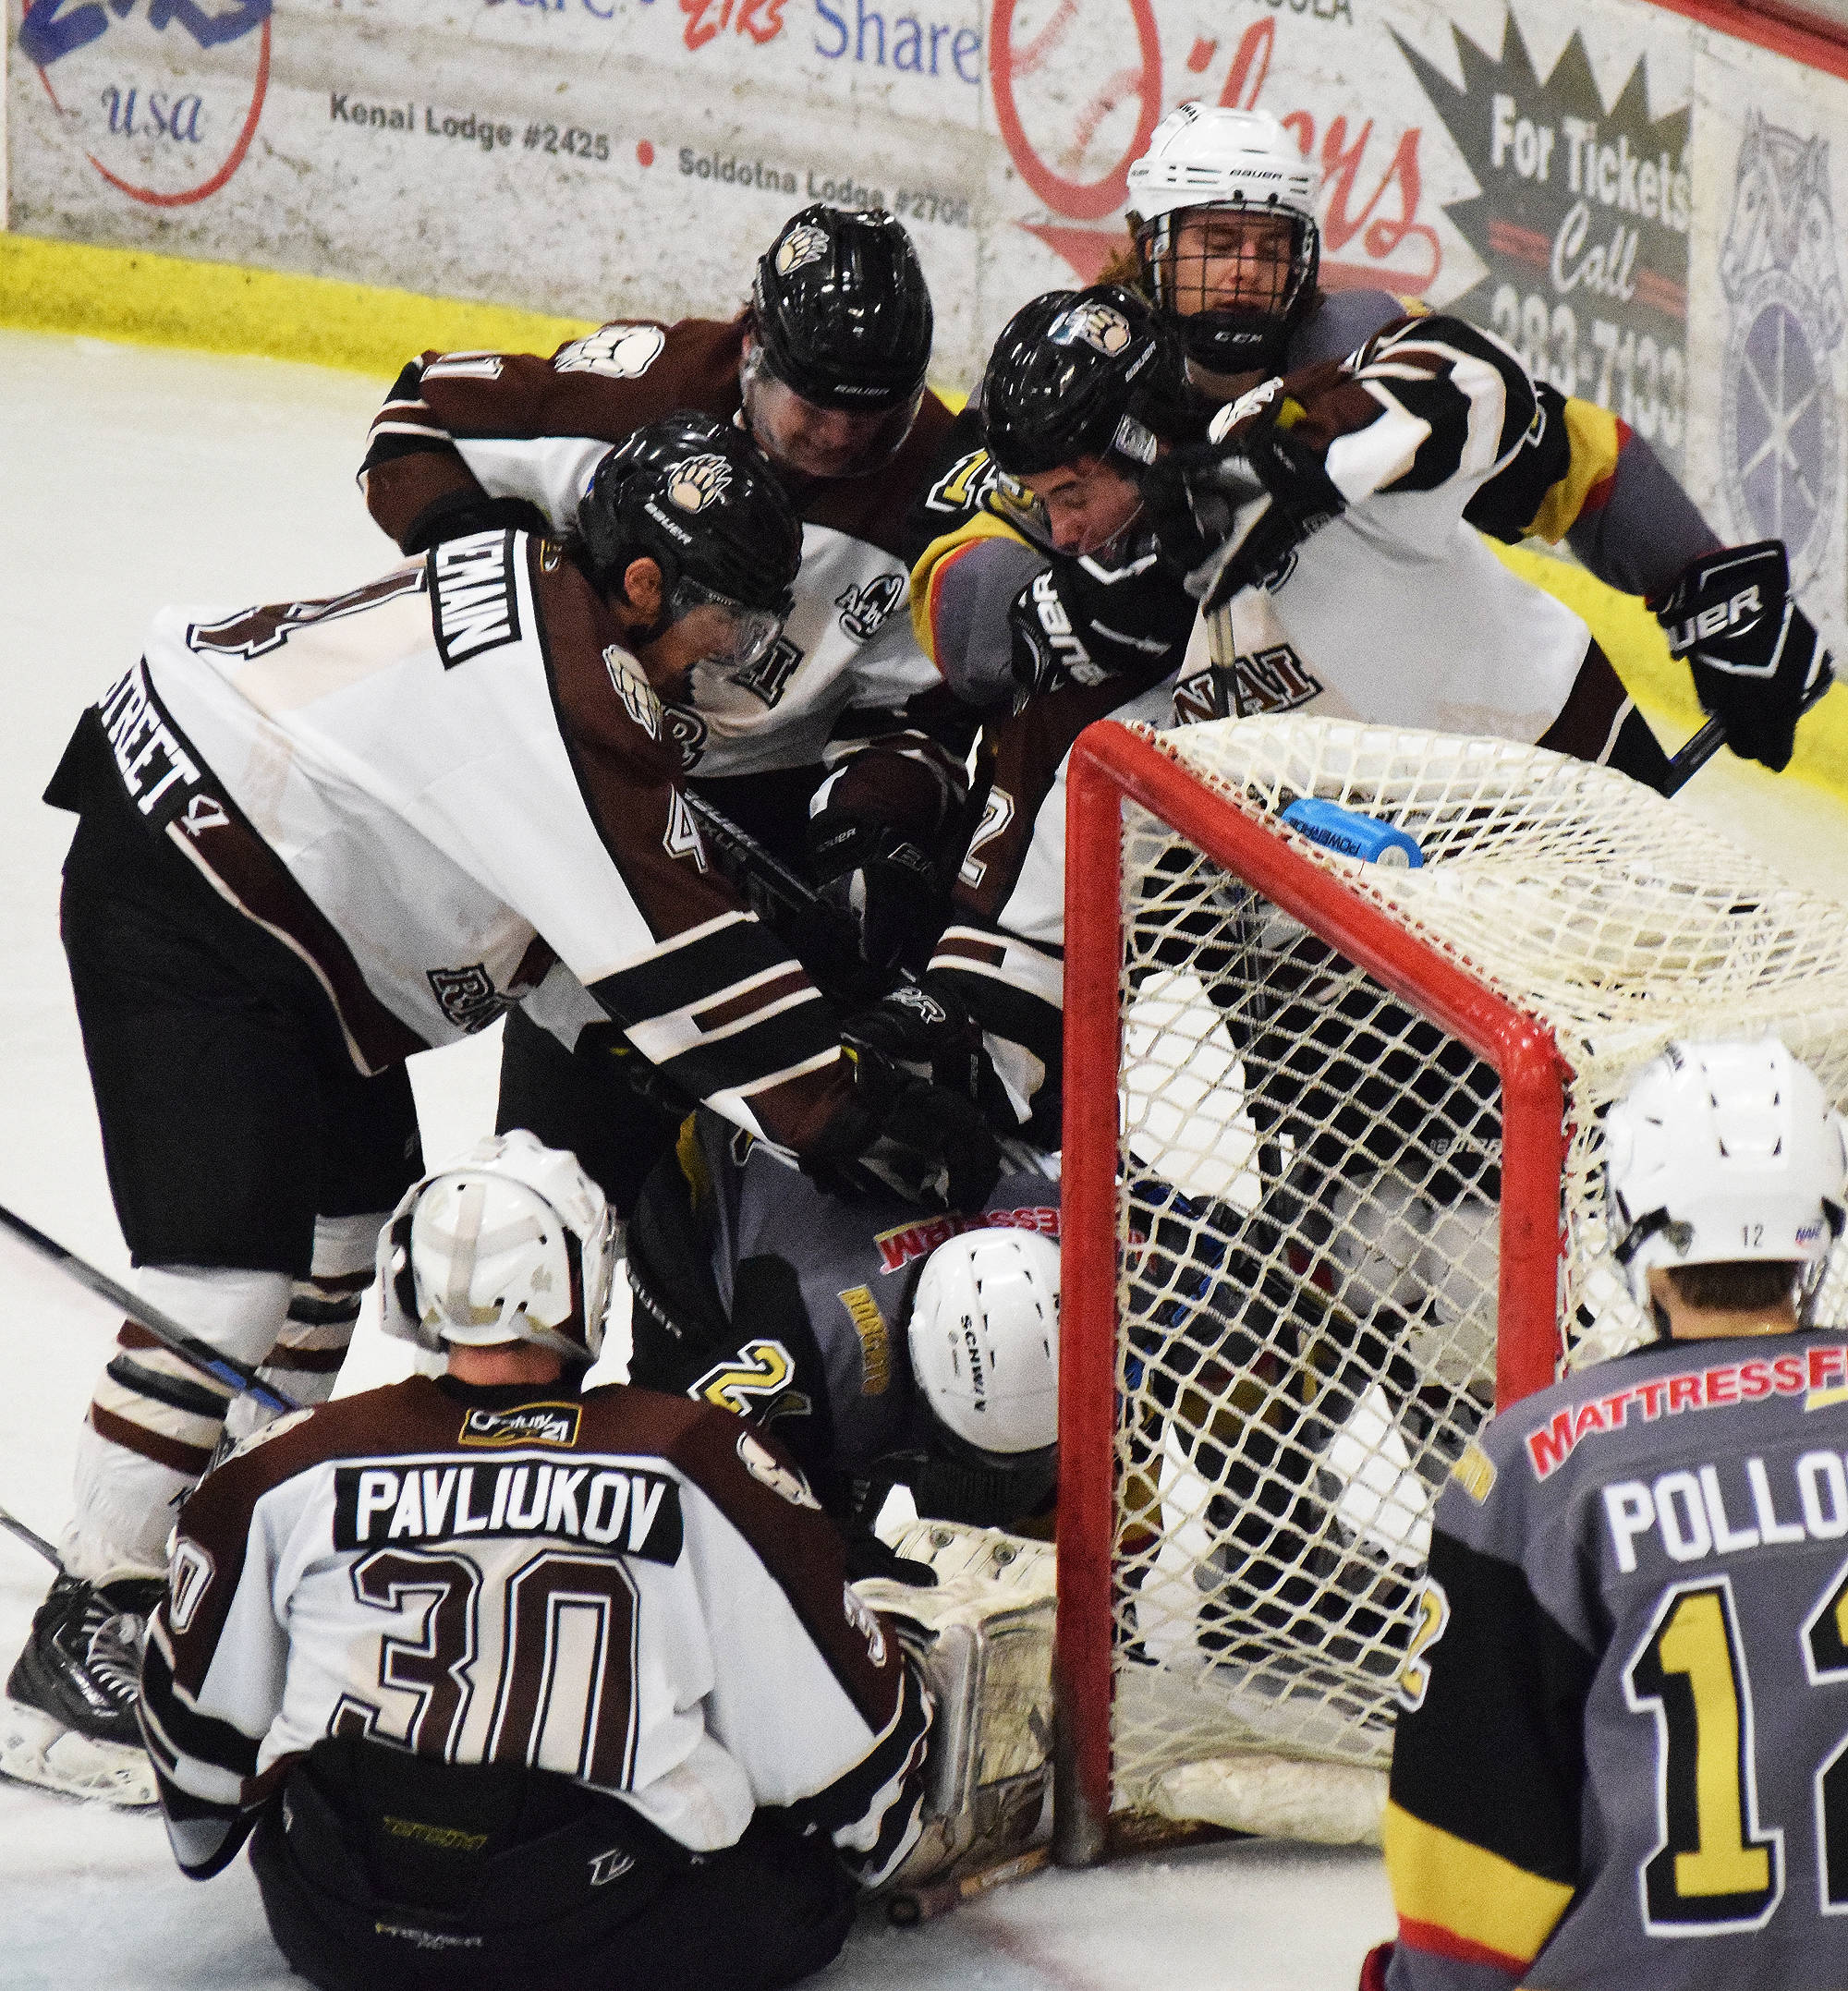 A scrum of Kenai River and Bismarck players gather around the Brown Bears net Friday night at the Soldotna Regional Sports Complex. (Photo by Joey Klecka/Peninsula Clarion)